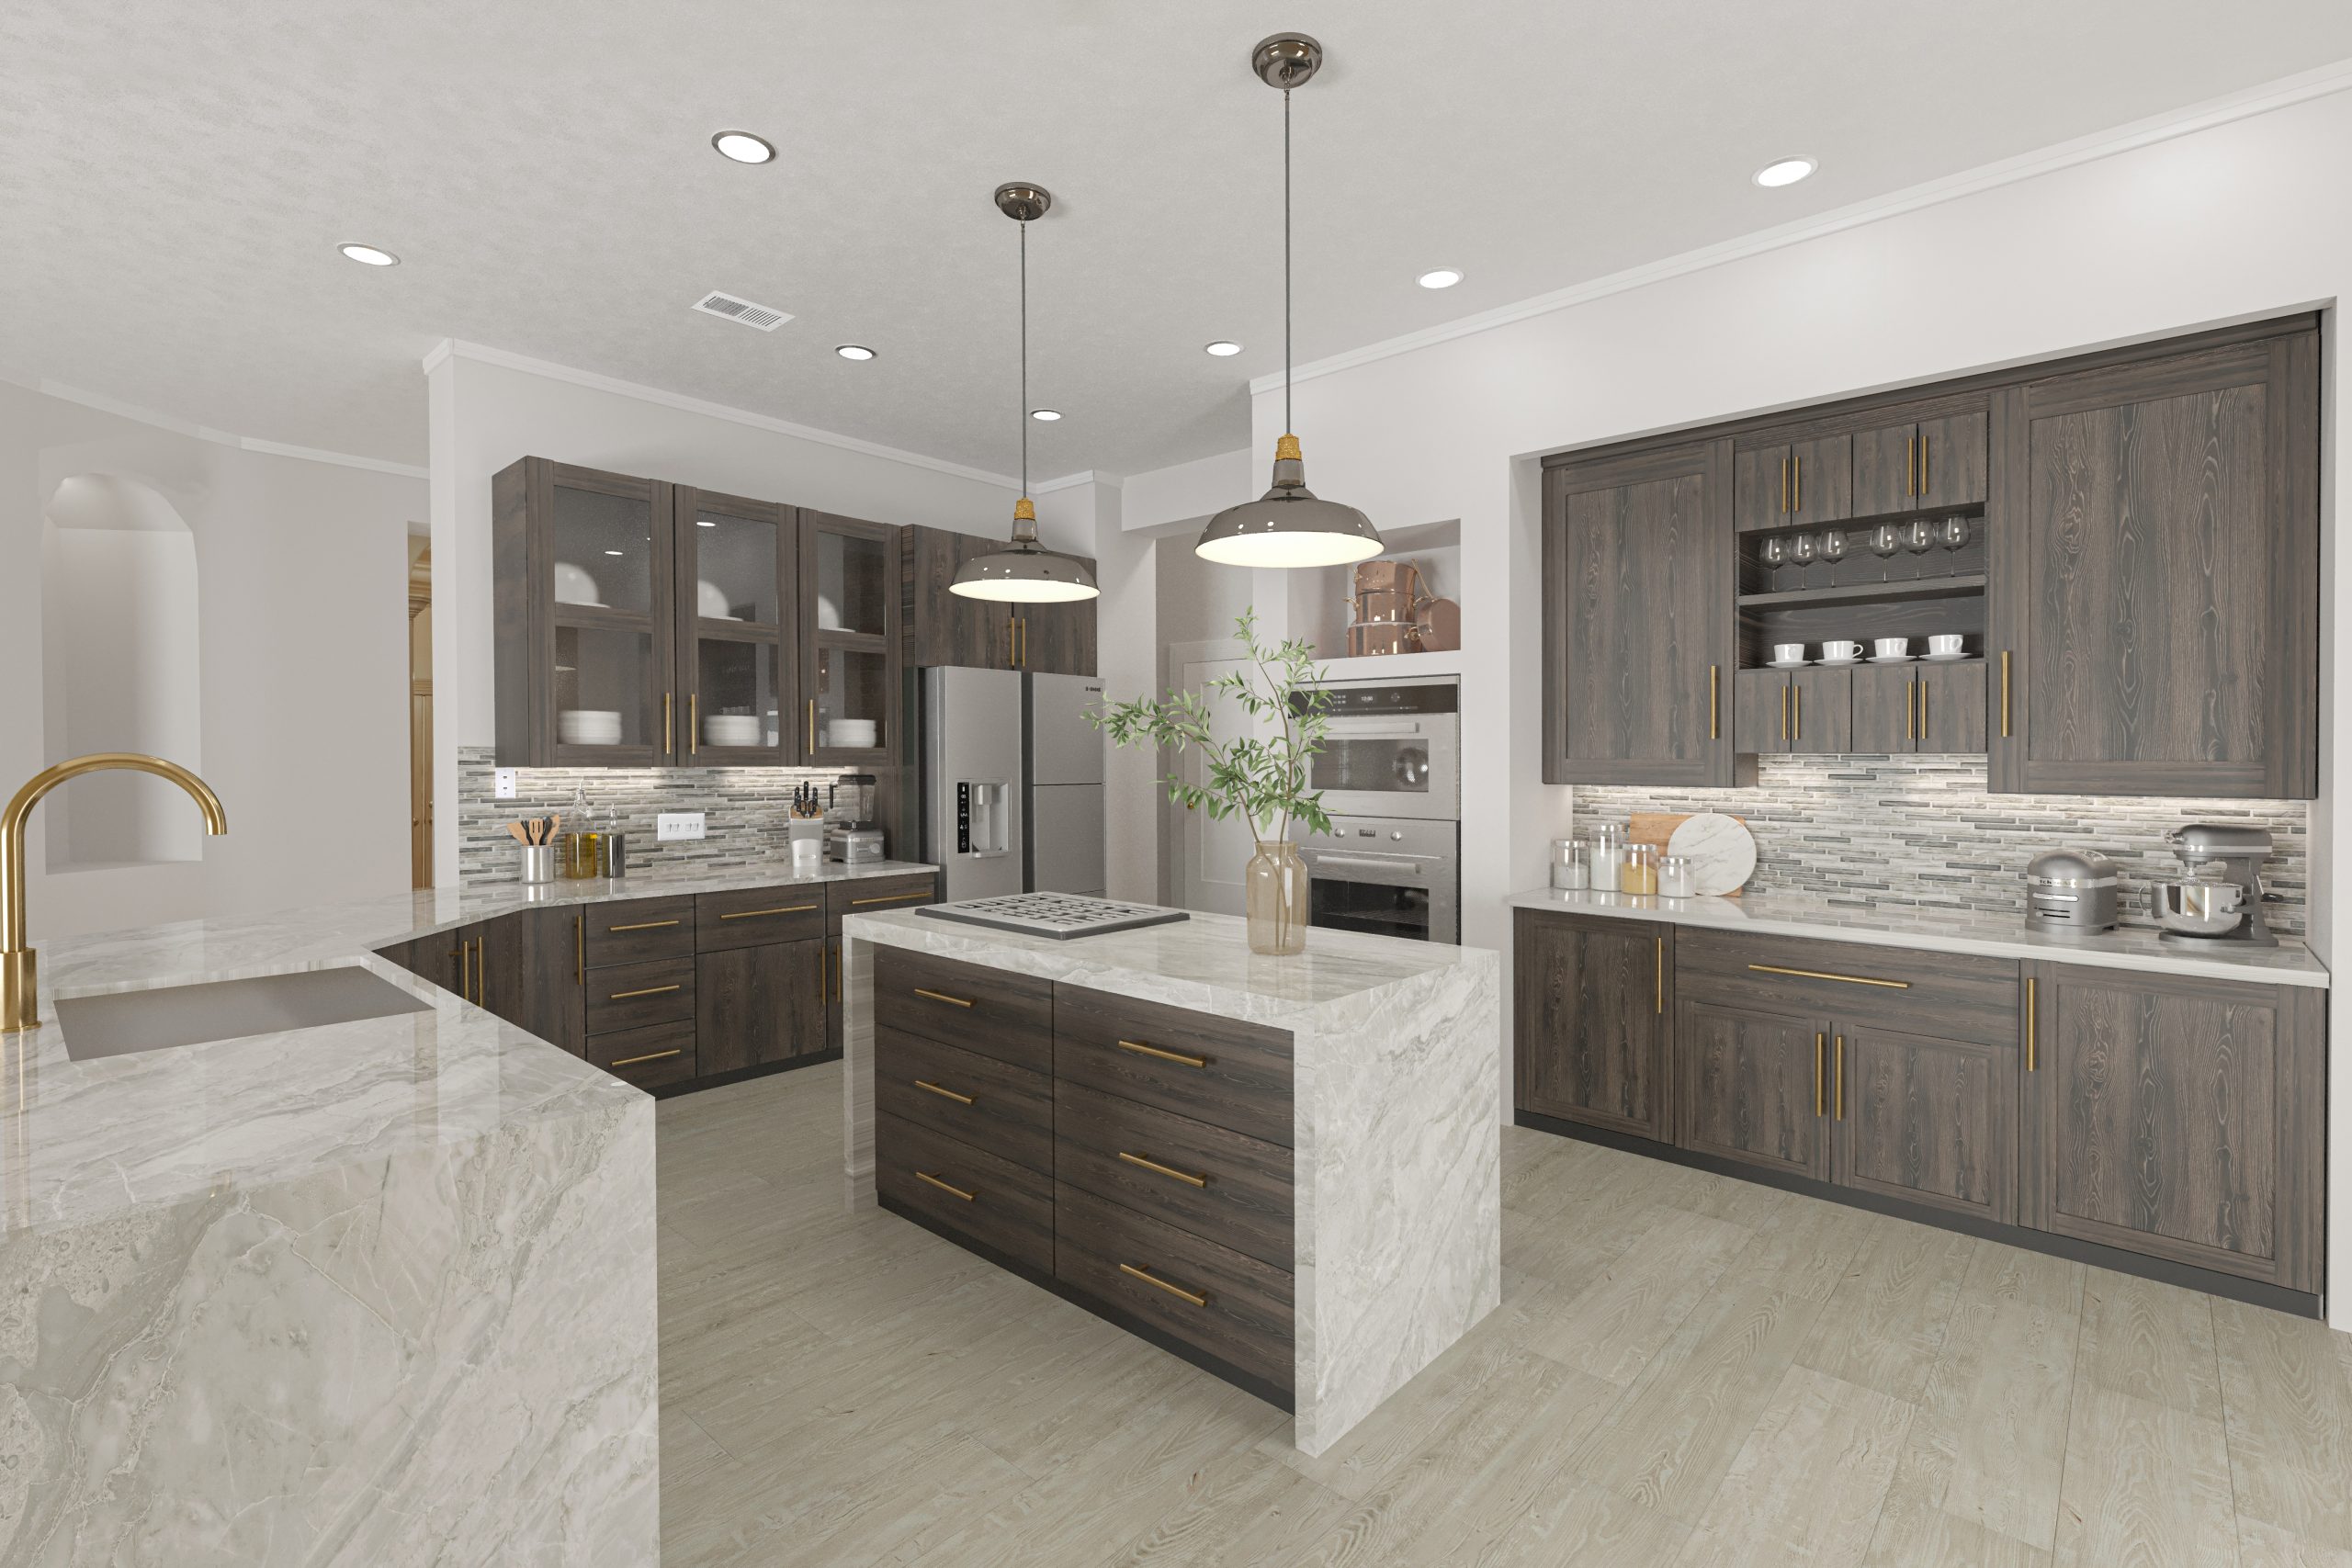 Real Estate Photo Edit: Residential Virtual Remodeling, After Image